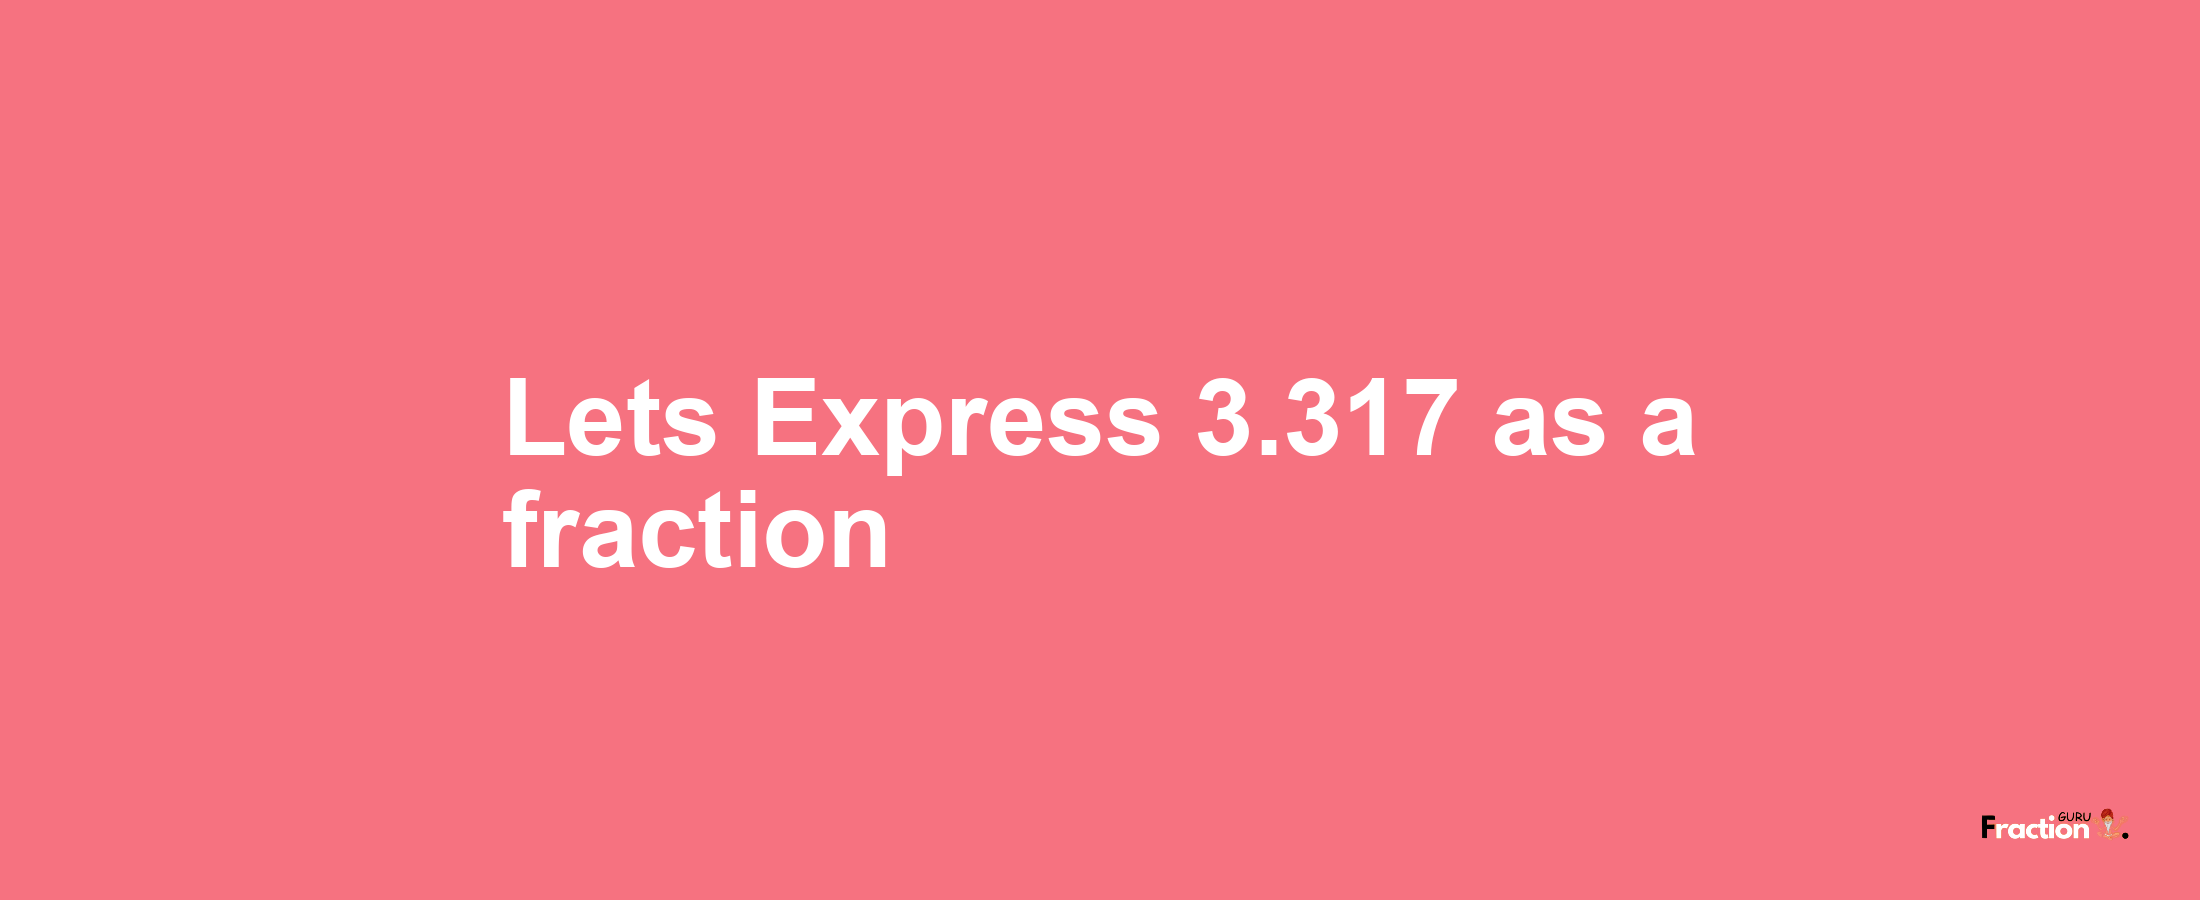 Lets Express 3.317 as afraction